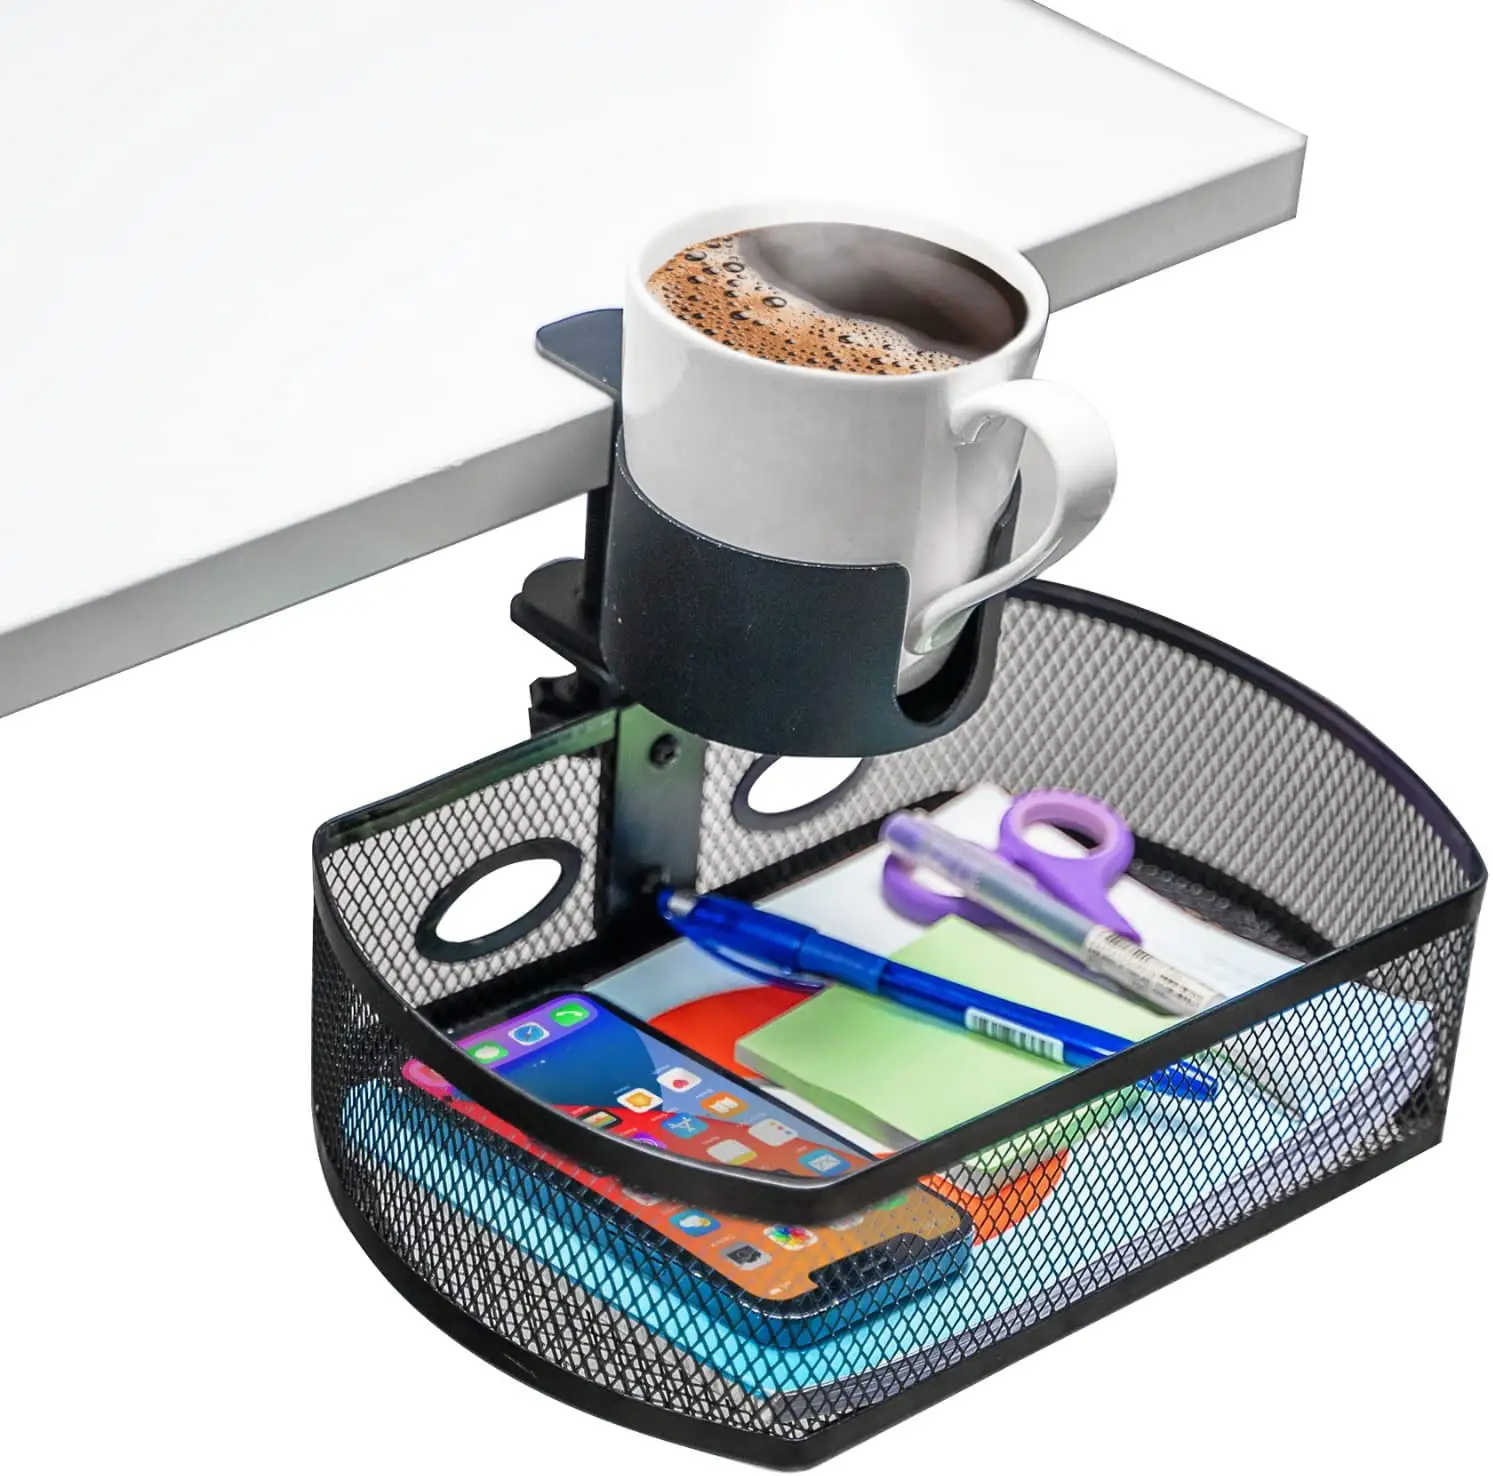 Under Desk Organizer 360 Rotatable Hidden Storage Box and Cup Holder C-Clamp Mount Hanging Desk Storage Tray for Home Office